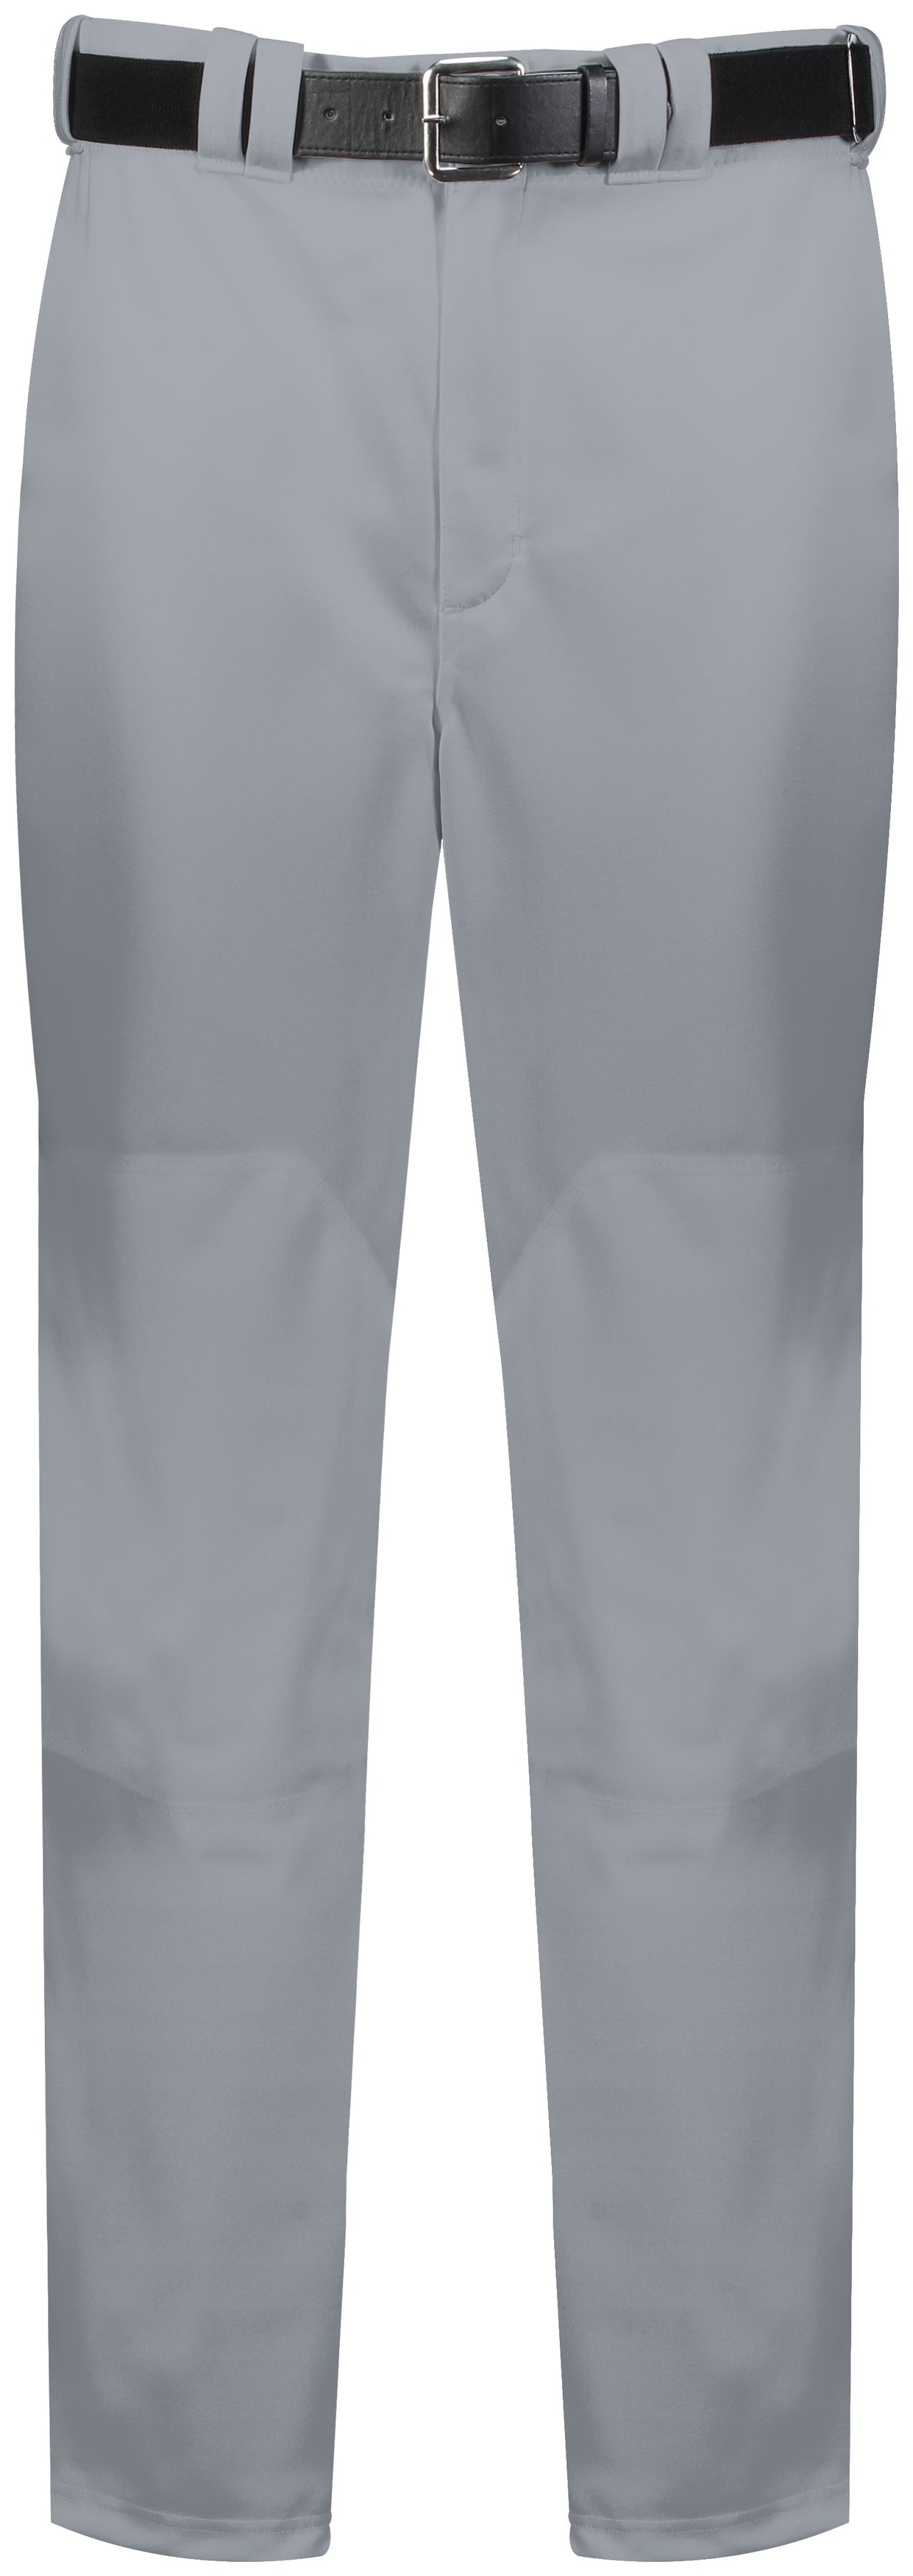 Russell Russell Piped Diamond Series Baseball Pant 2.0 - Casual